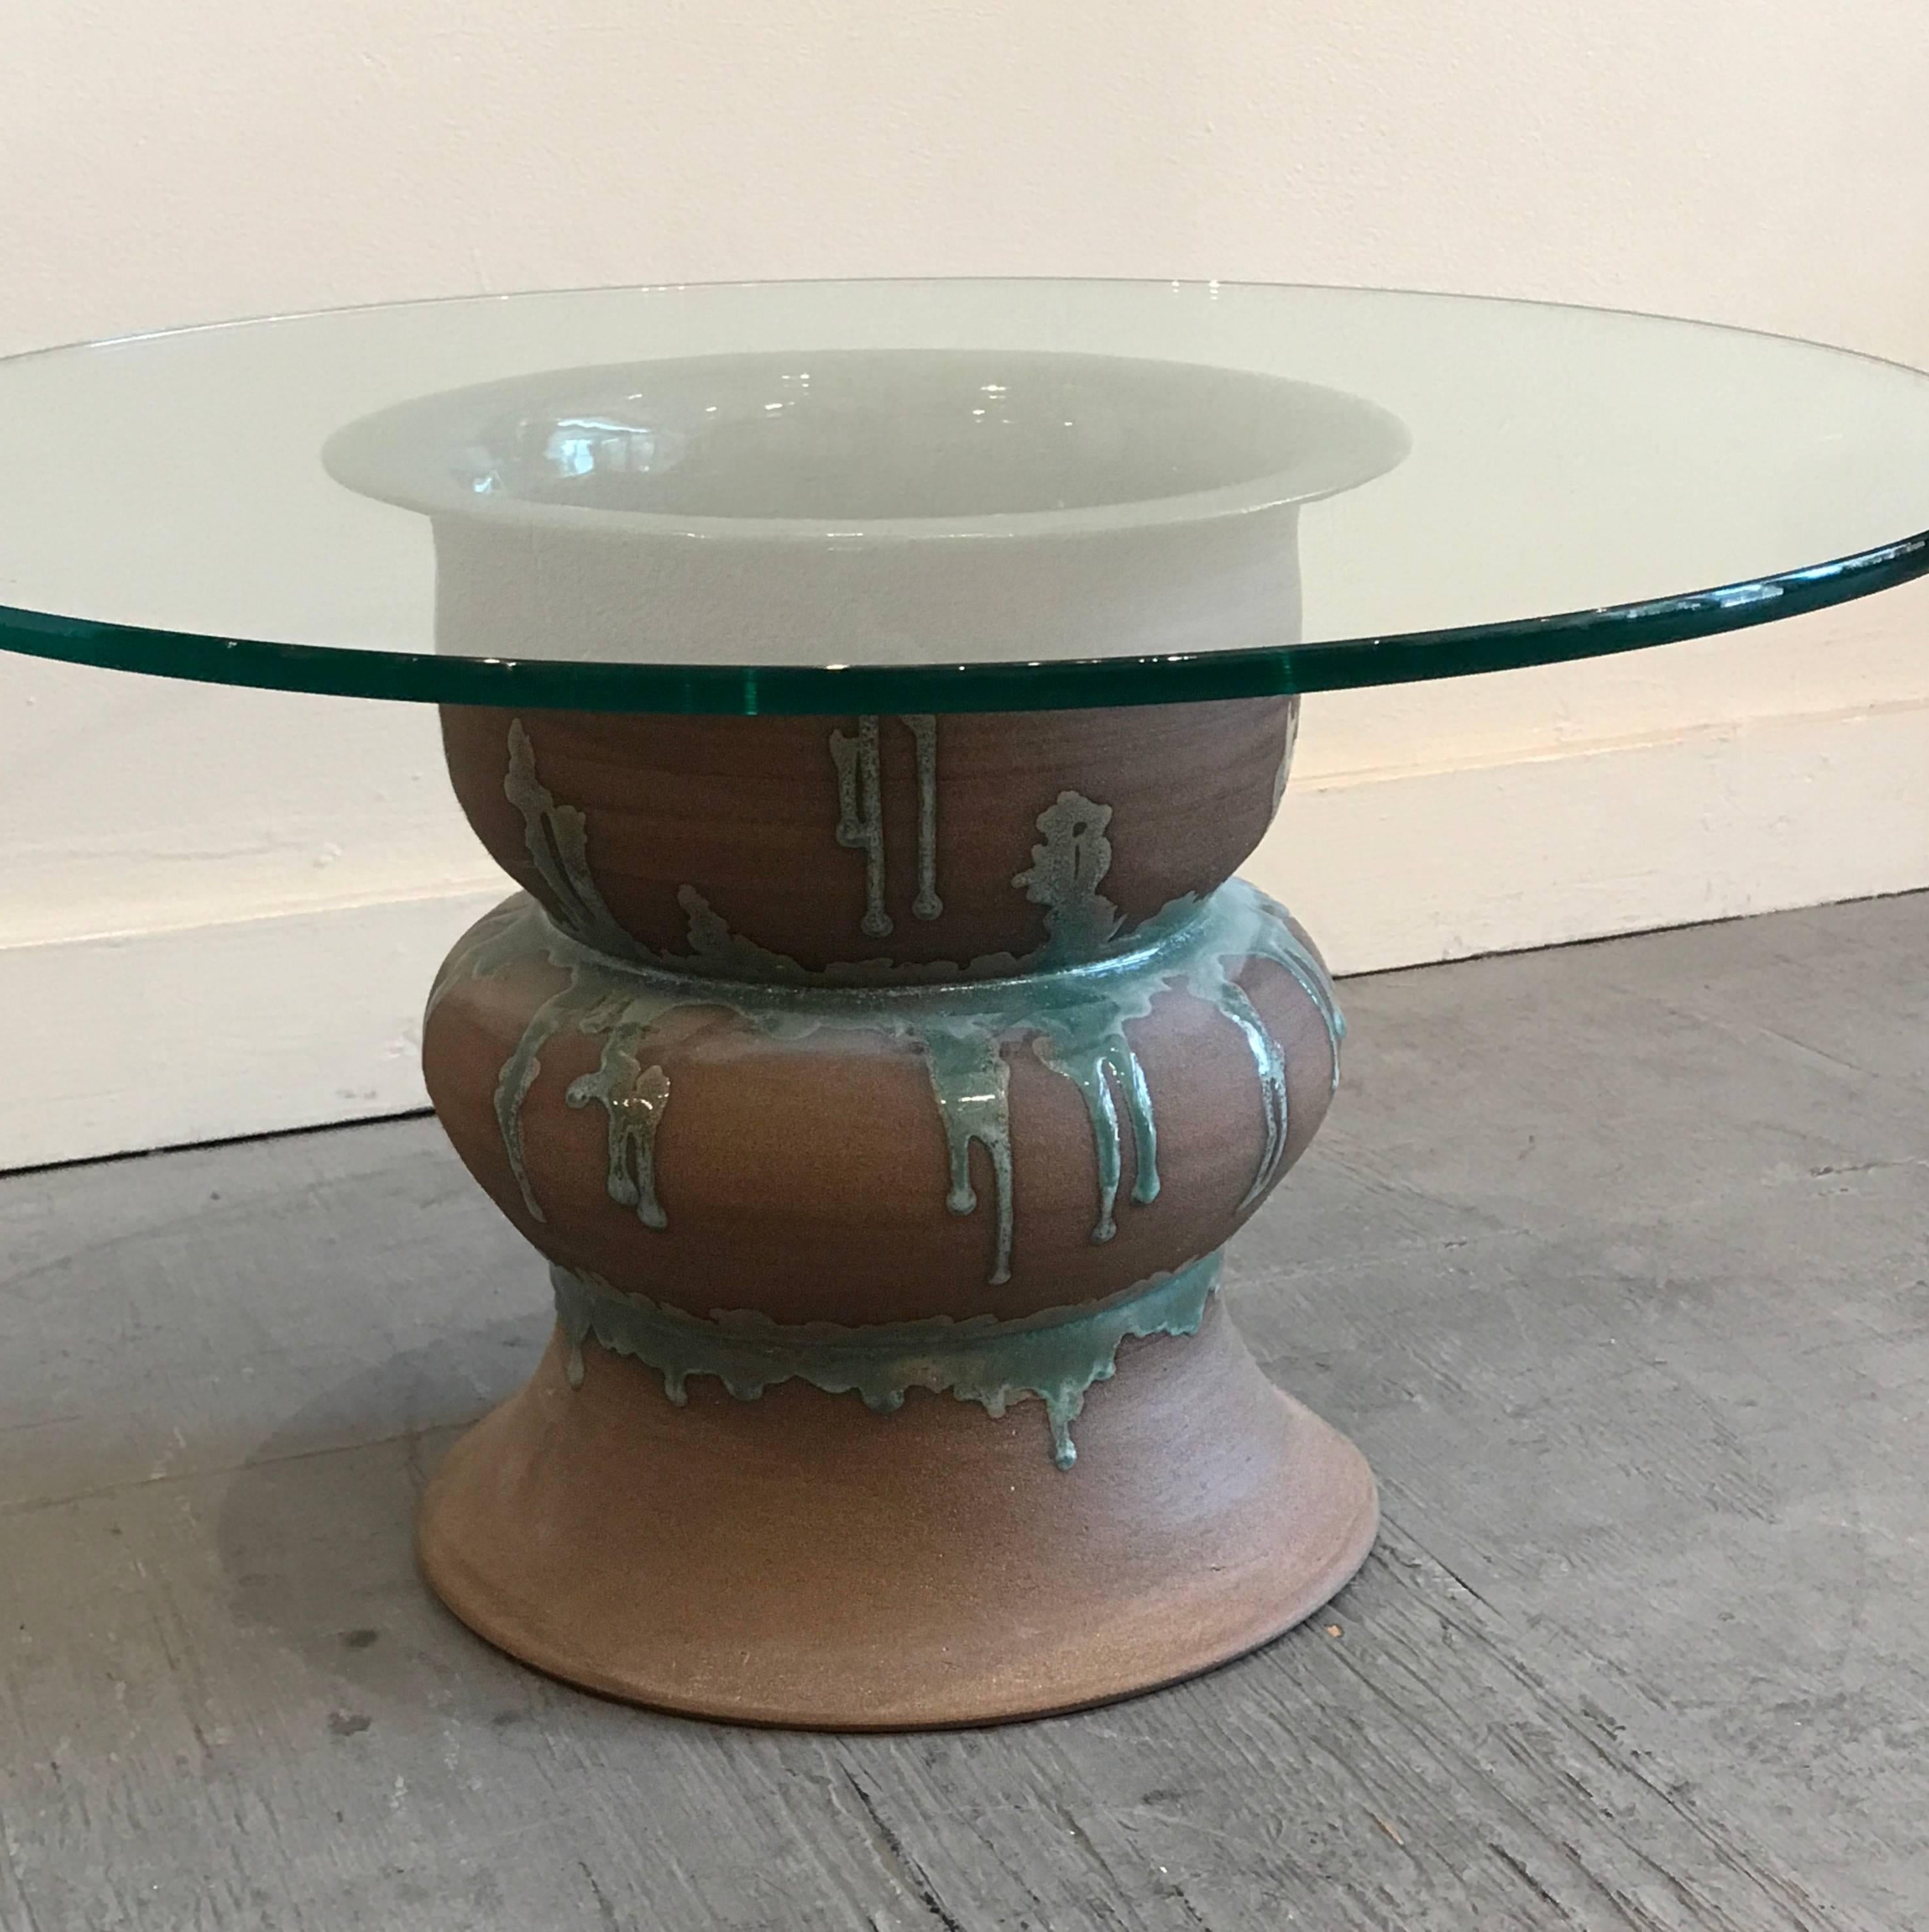 Hand thrown and glazed ceramic base side table with a round glass top. The ceramic base is a unglazed medium brown clay with sea green drip glaze accents to the side and is glazed in the interior of the piece. The base consists of two reversed